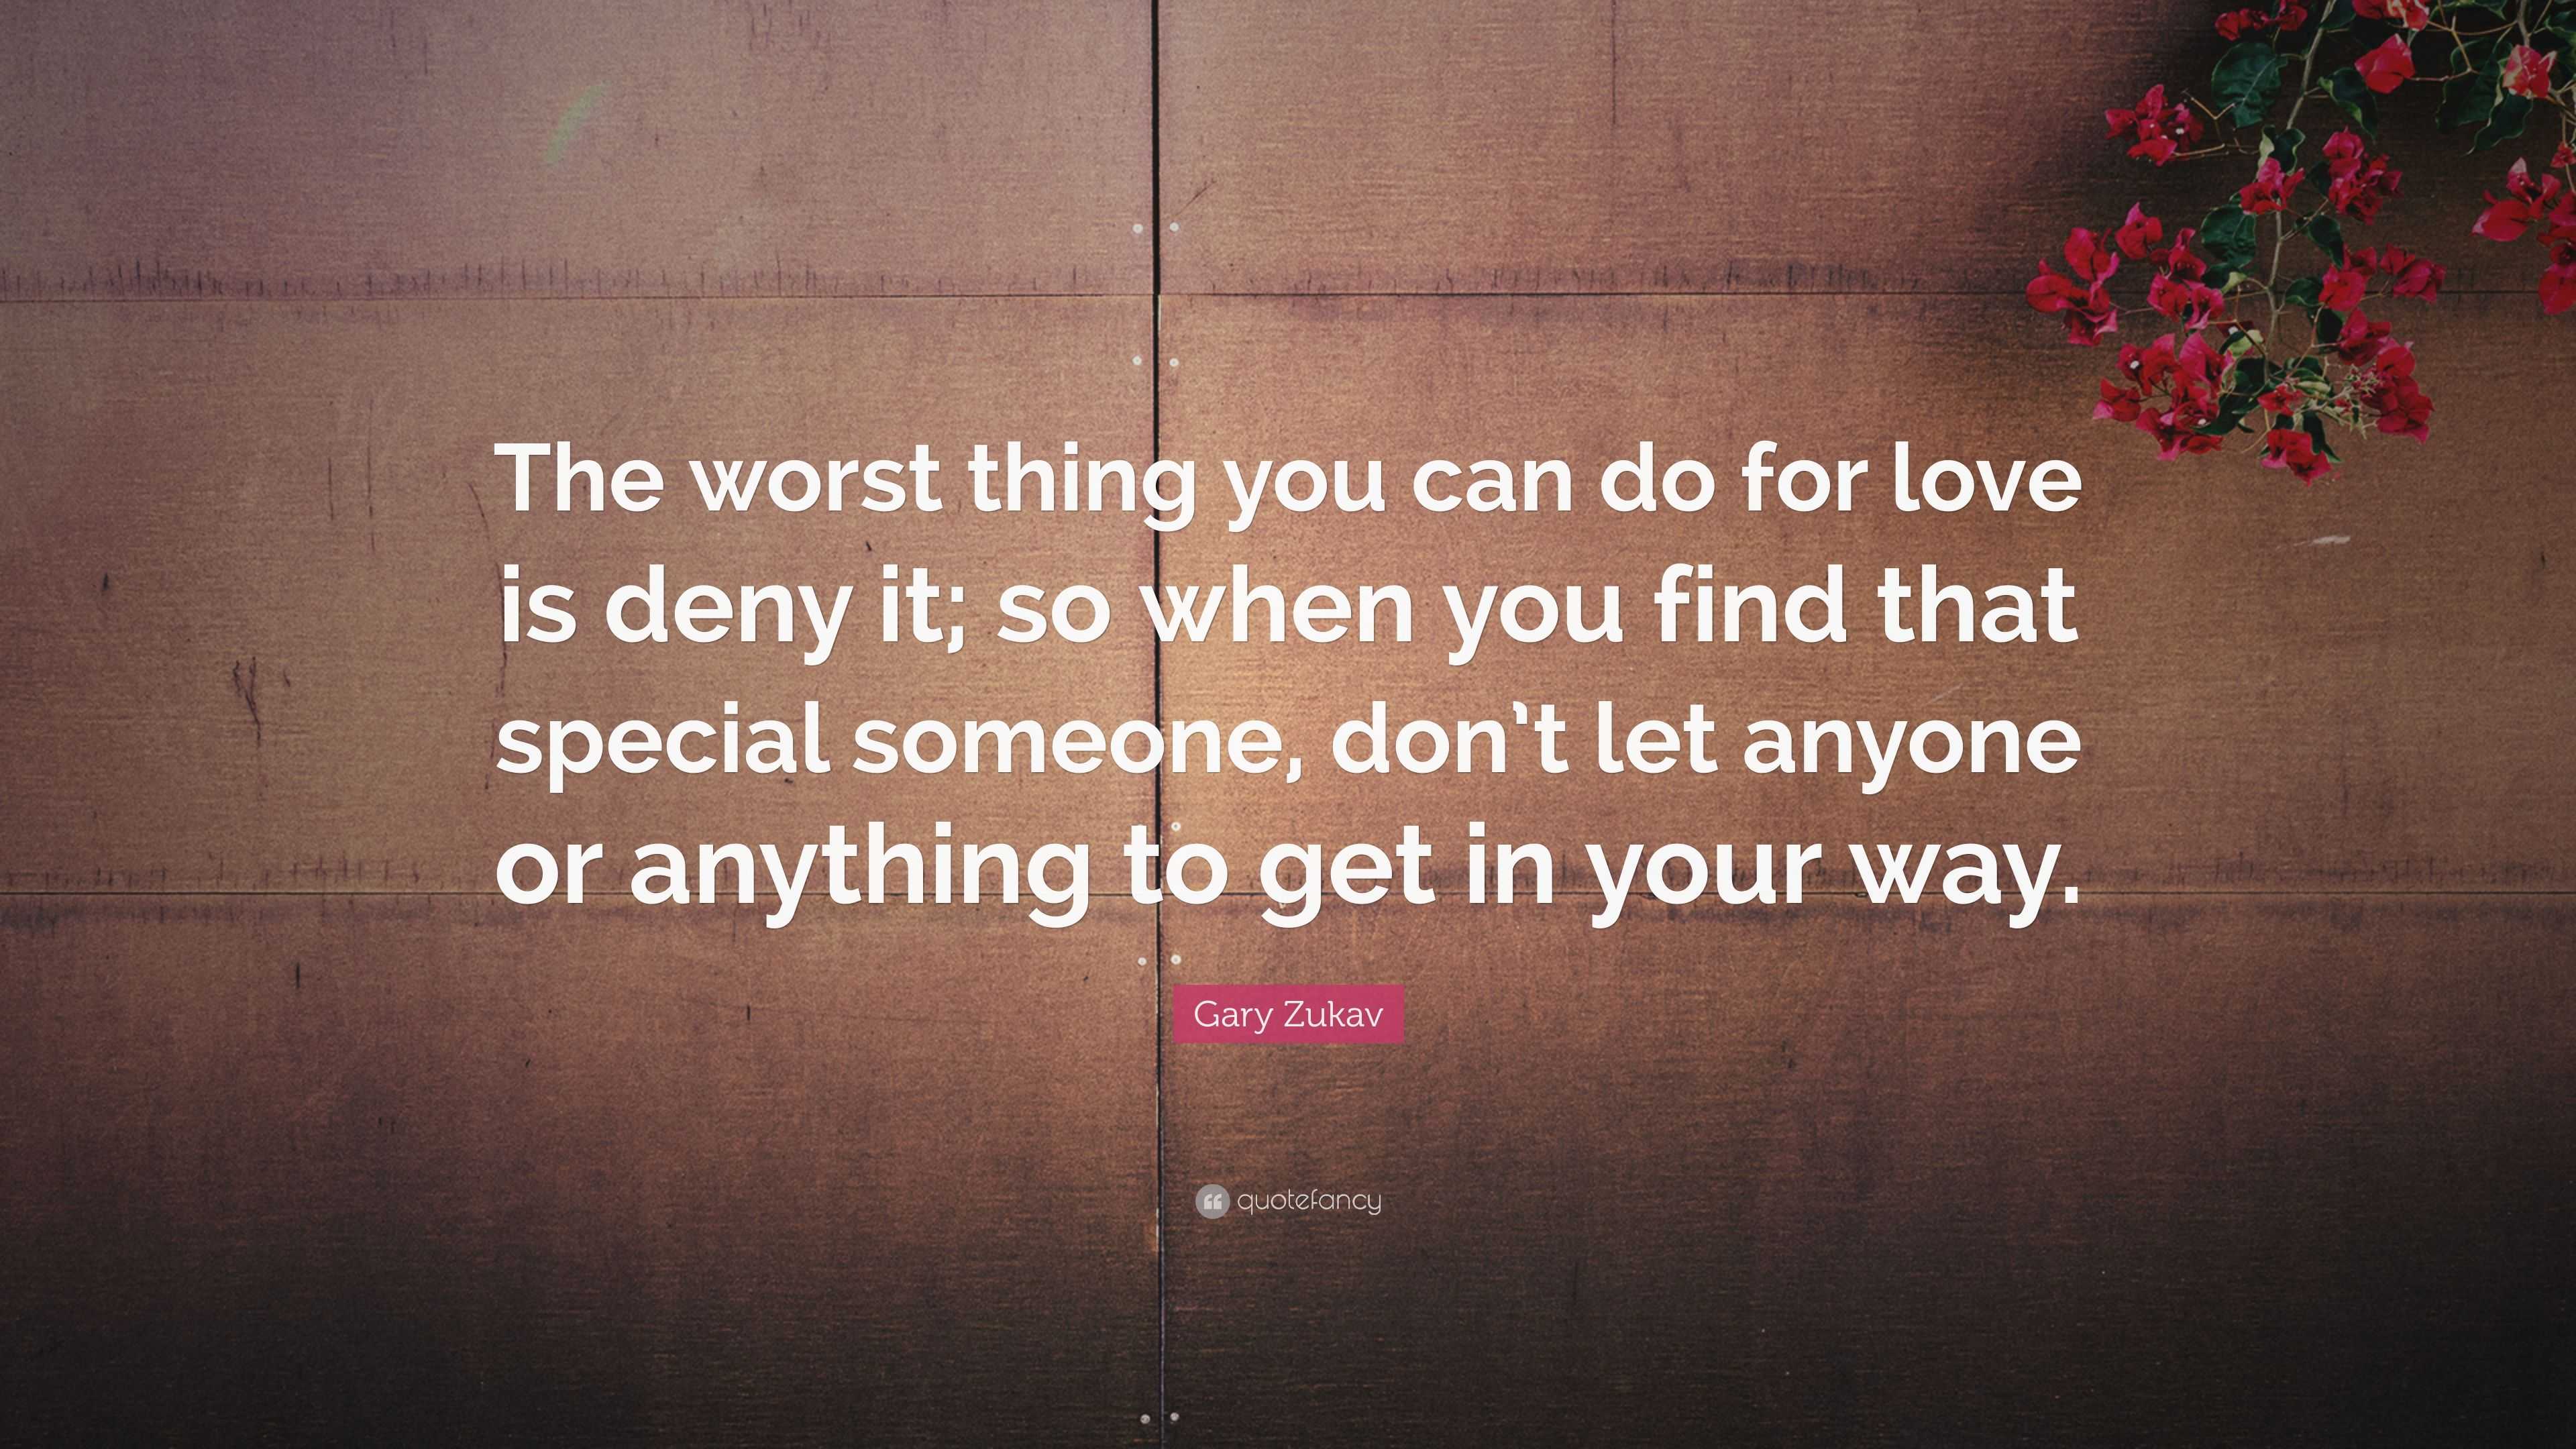 Gary Zukav Quote “The worst thing you can do for love is deny it